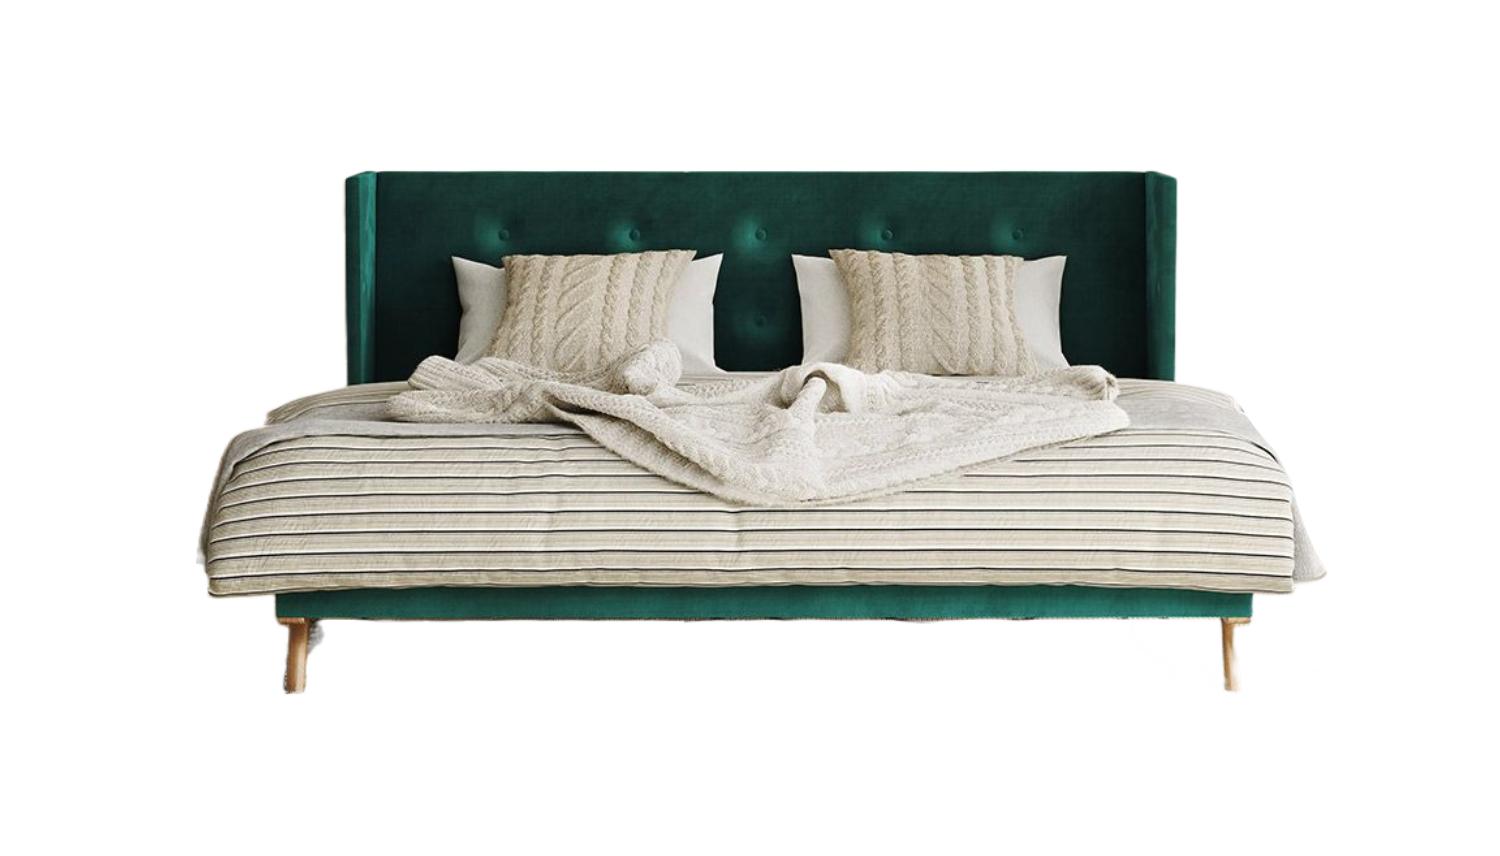 Contemporary, Modern Panel Bed Durango VGMABR-83 VGMABR-83-Q in Walnut, Green Fabric